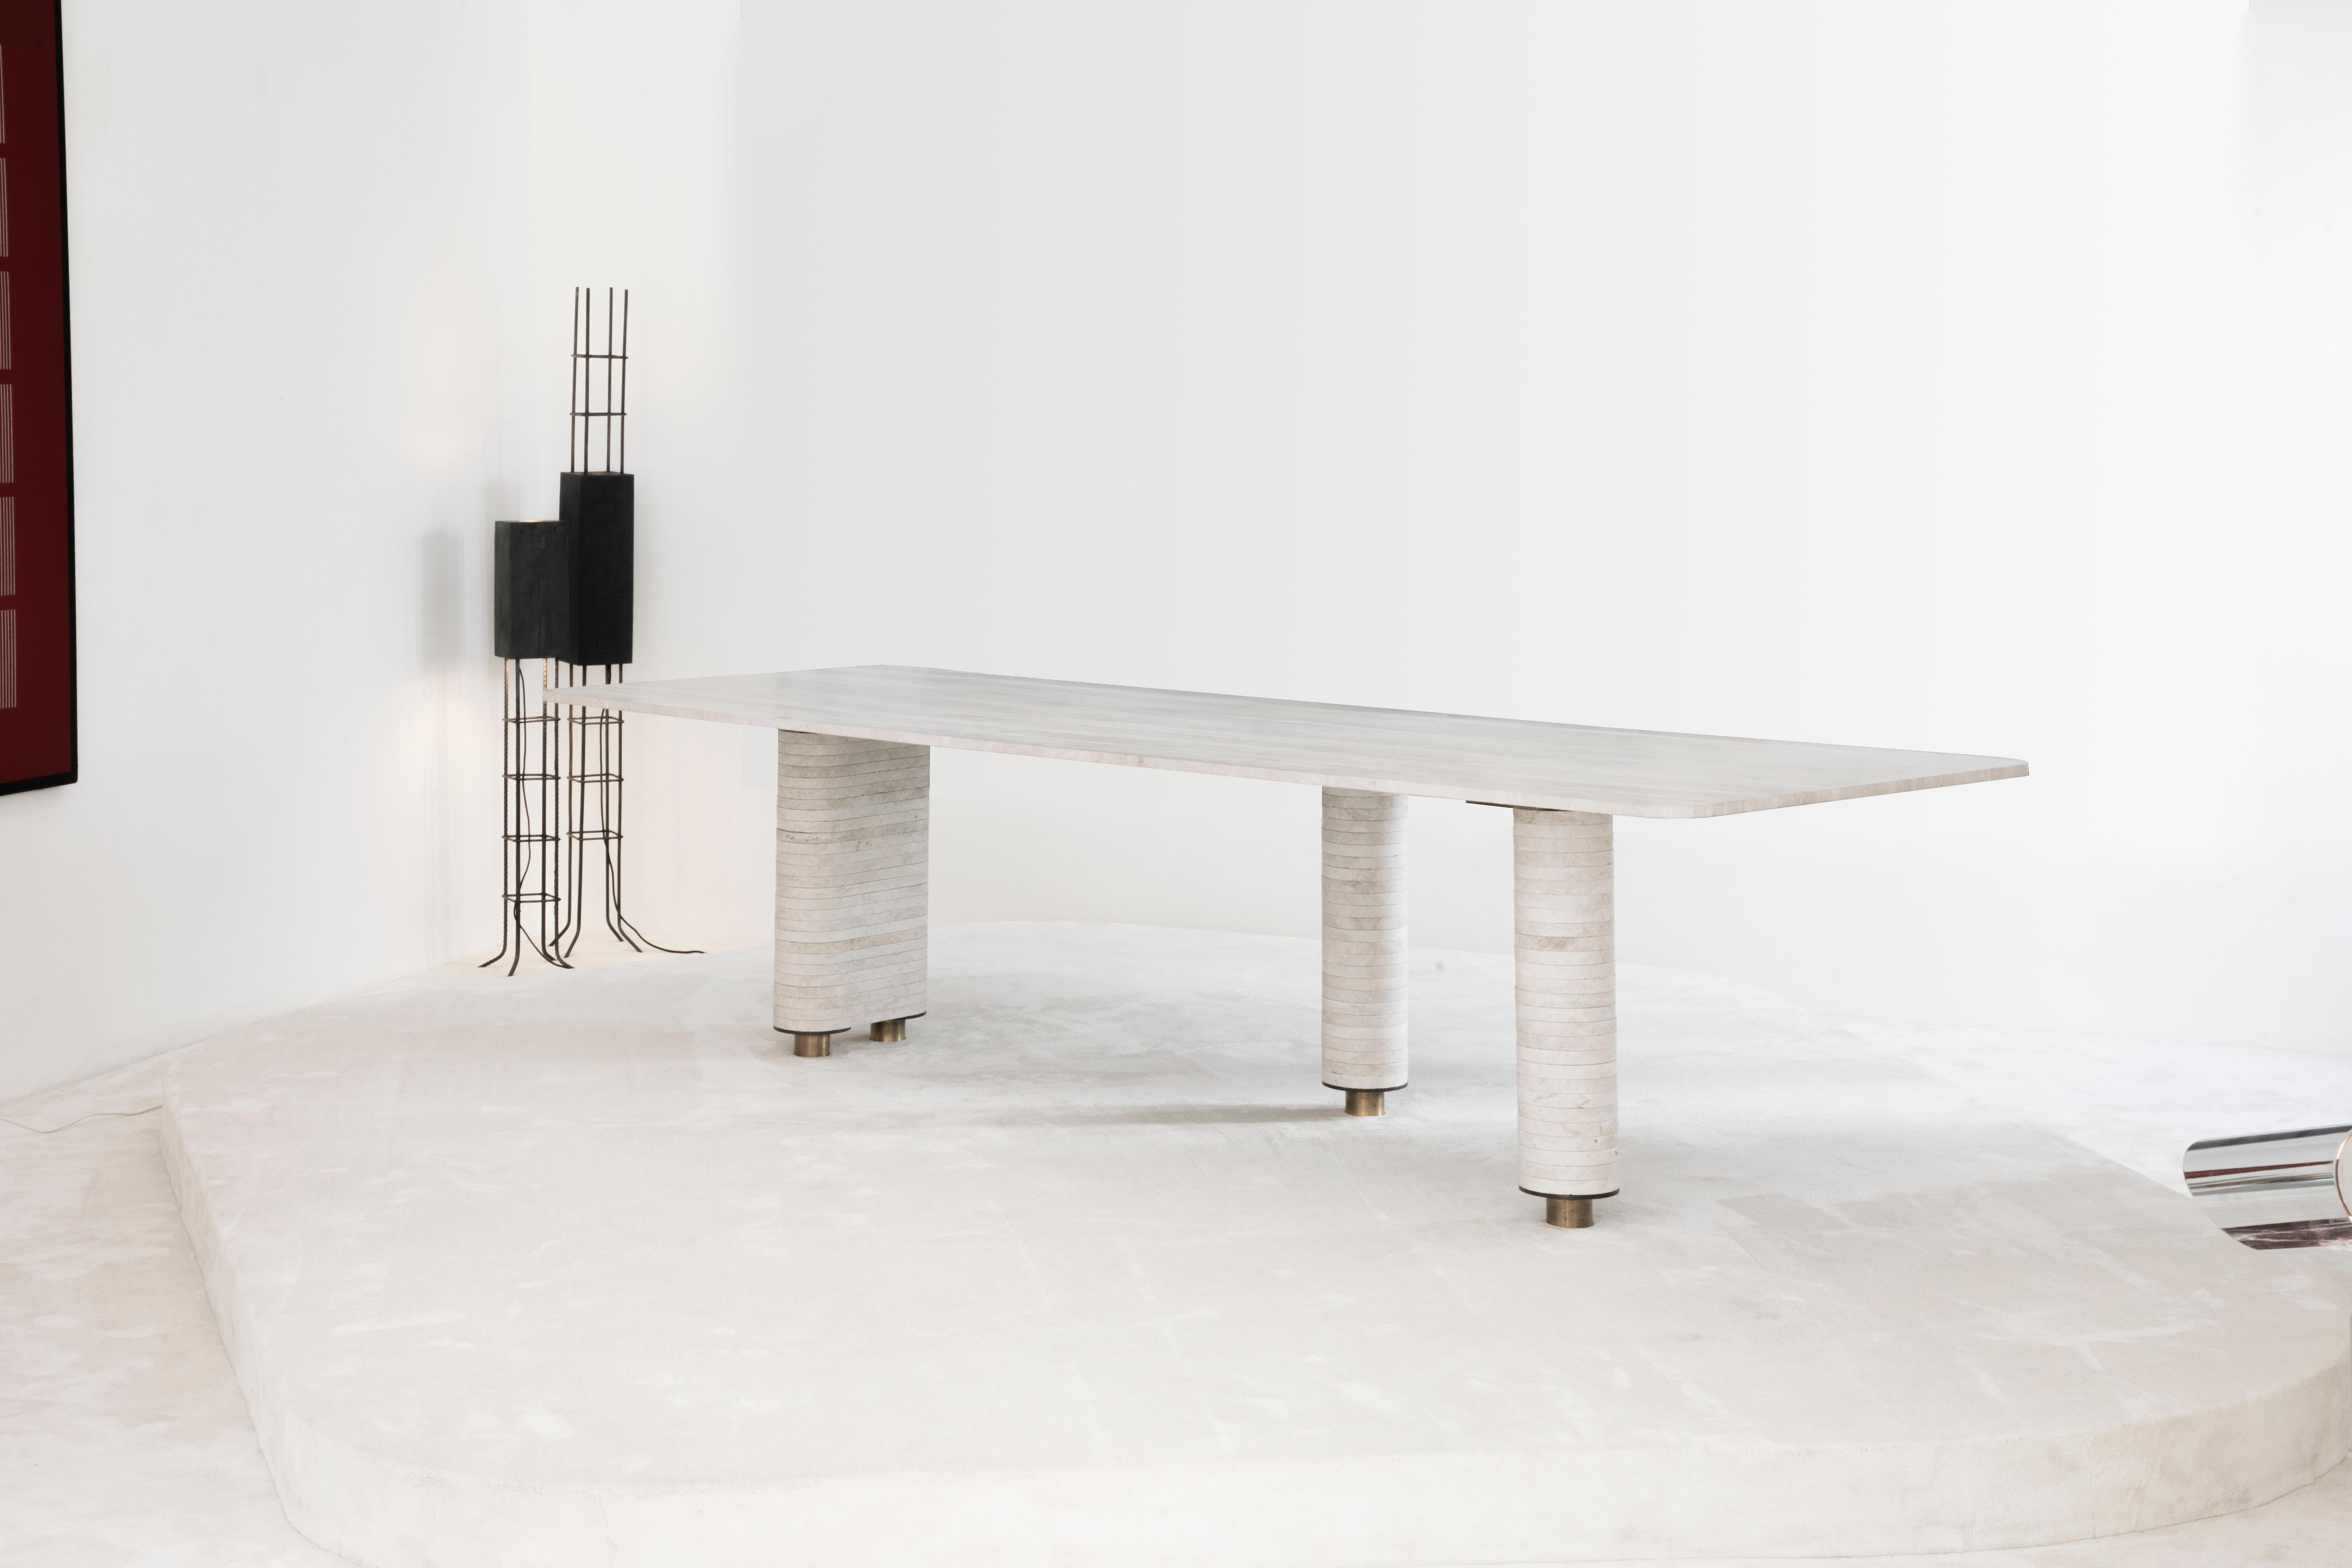 Aro dining table by Atra Design
Limites Edition of 5
Dimensions: D 280 x W 110 x H 73.6 cm
Materials: Taj Mahal marble, brass

Atra Design
We are Atra, a furniture brand produced by Atra form a mexico city–based high end production facility that